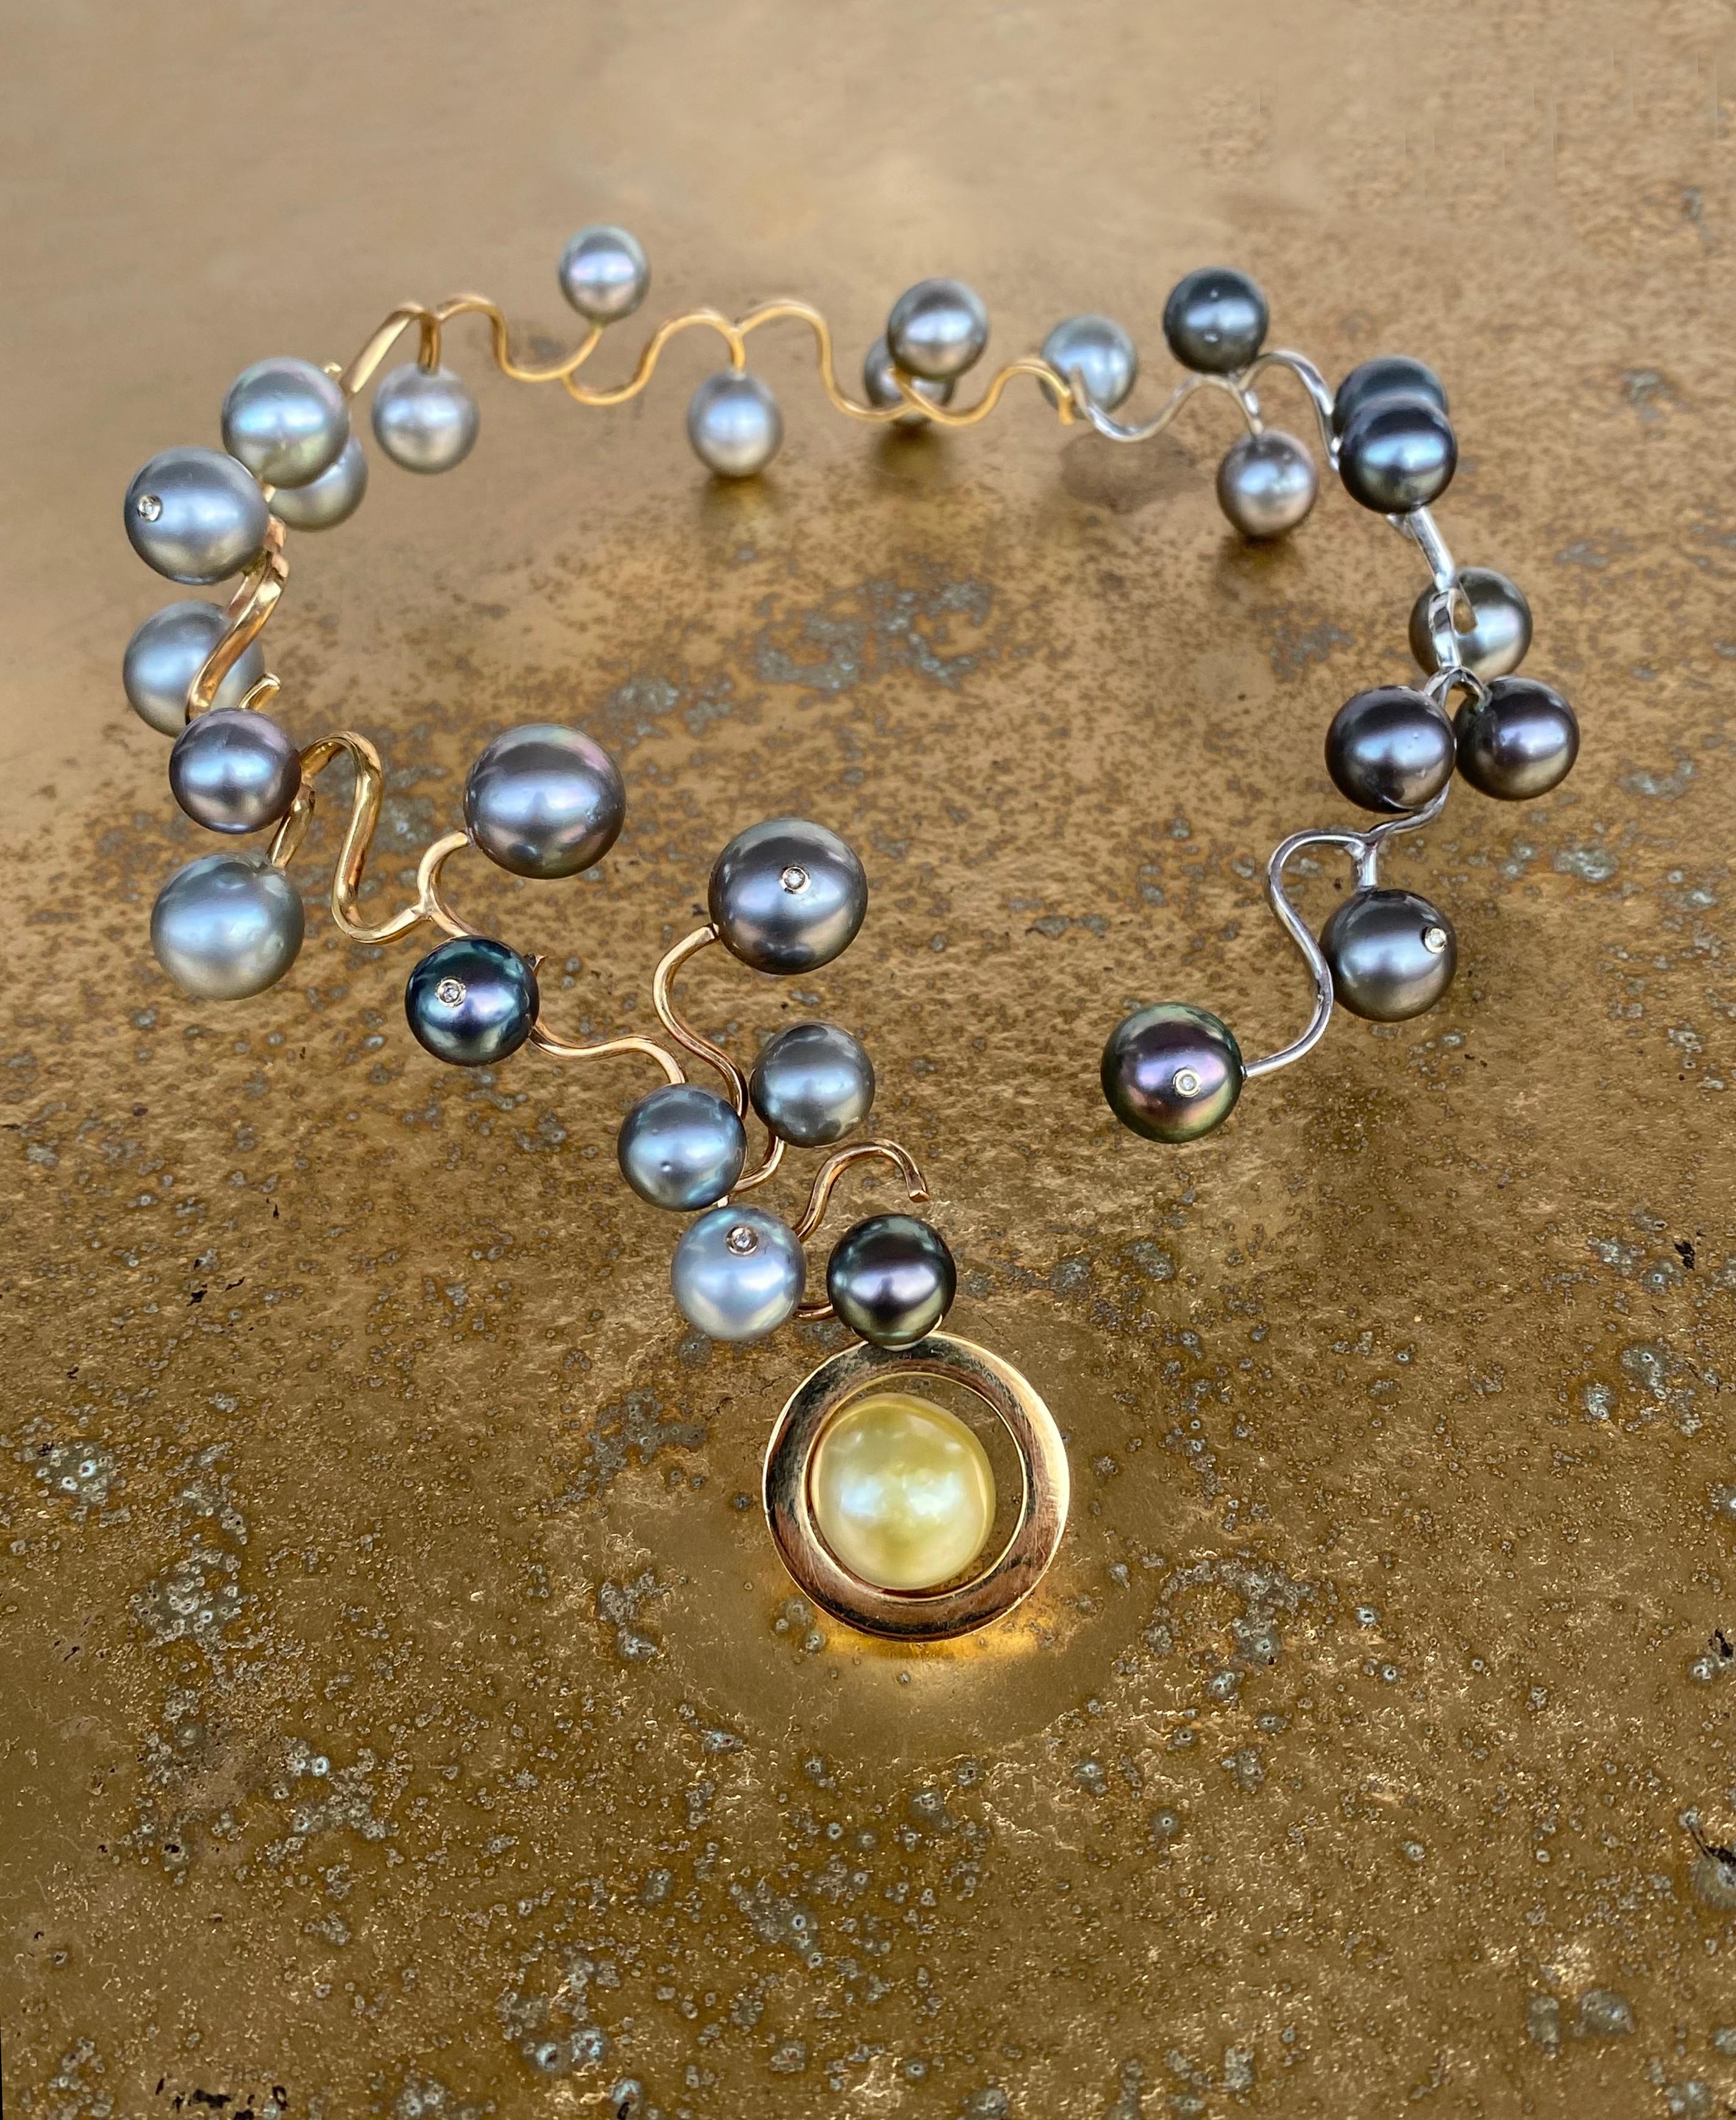 This One of a Kind Statement Tahitian Pearls and Diamonds Necklace, in 18 Karat Yellow and White Gold, is a high jewelry Award Winning Design.  This precious pearls and diamonds necklace evokes a Galaxy as it plays with its colors and shapes. In